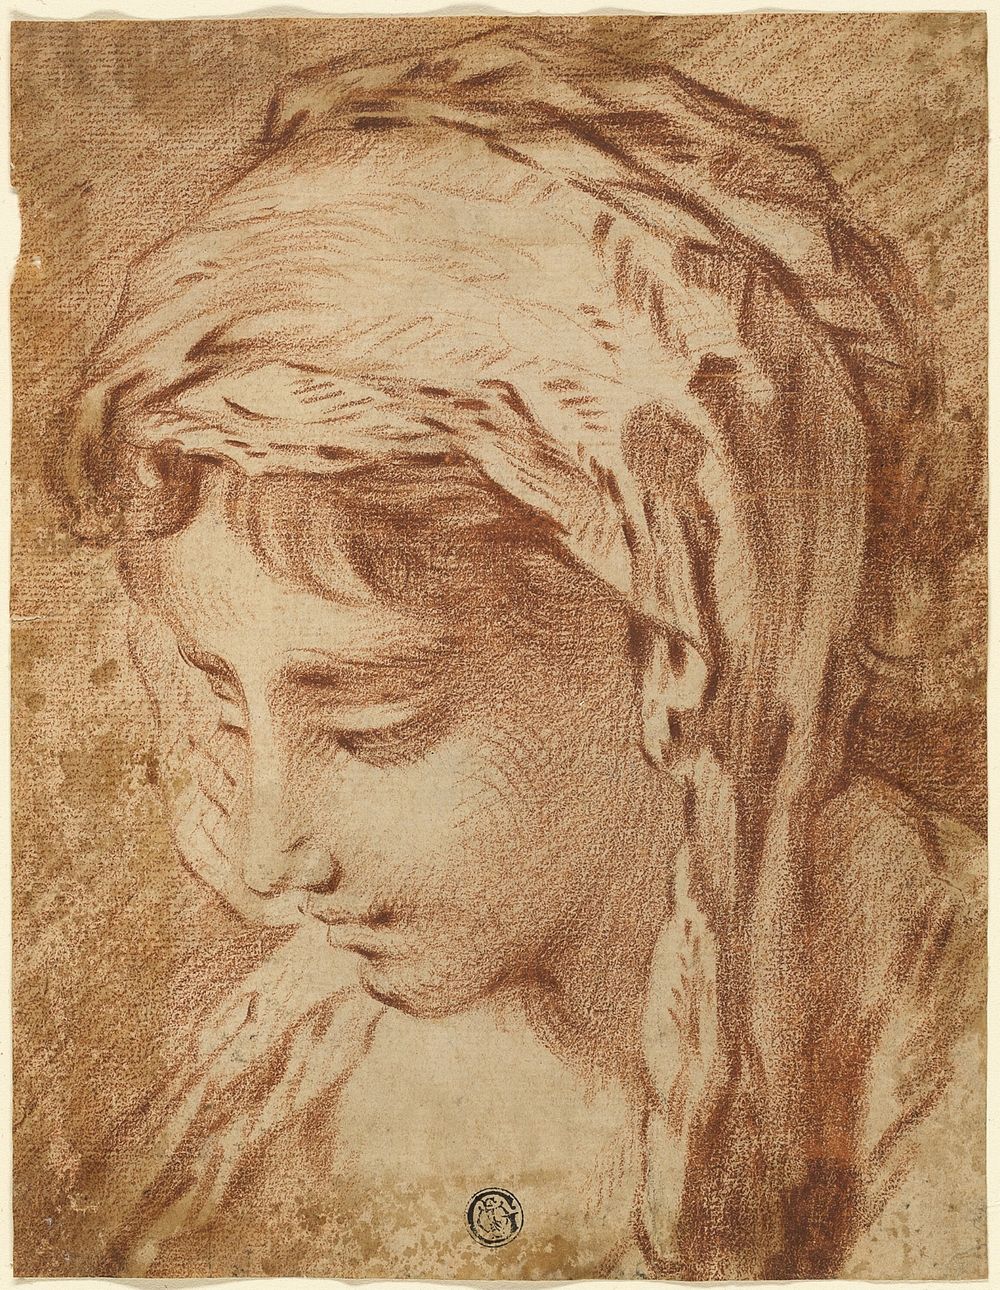 Head of a Woman by François Boucher